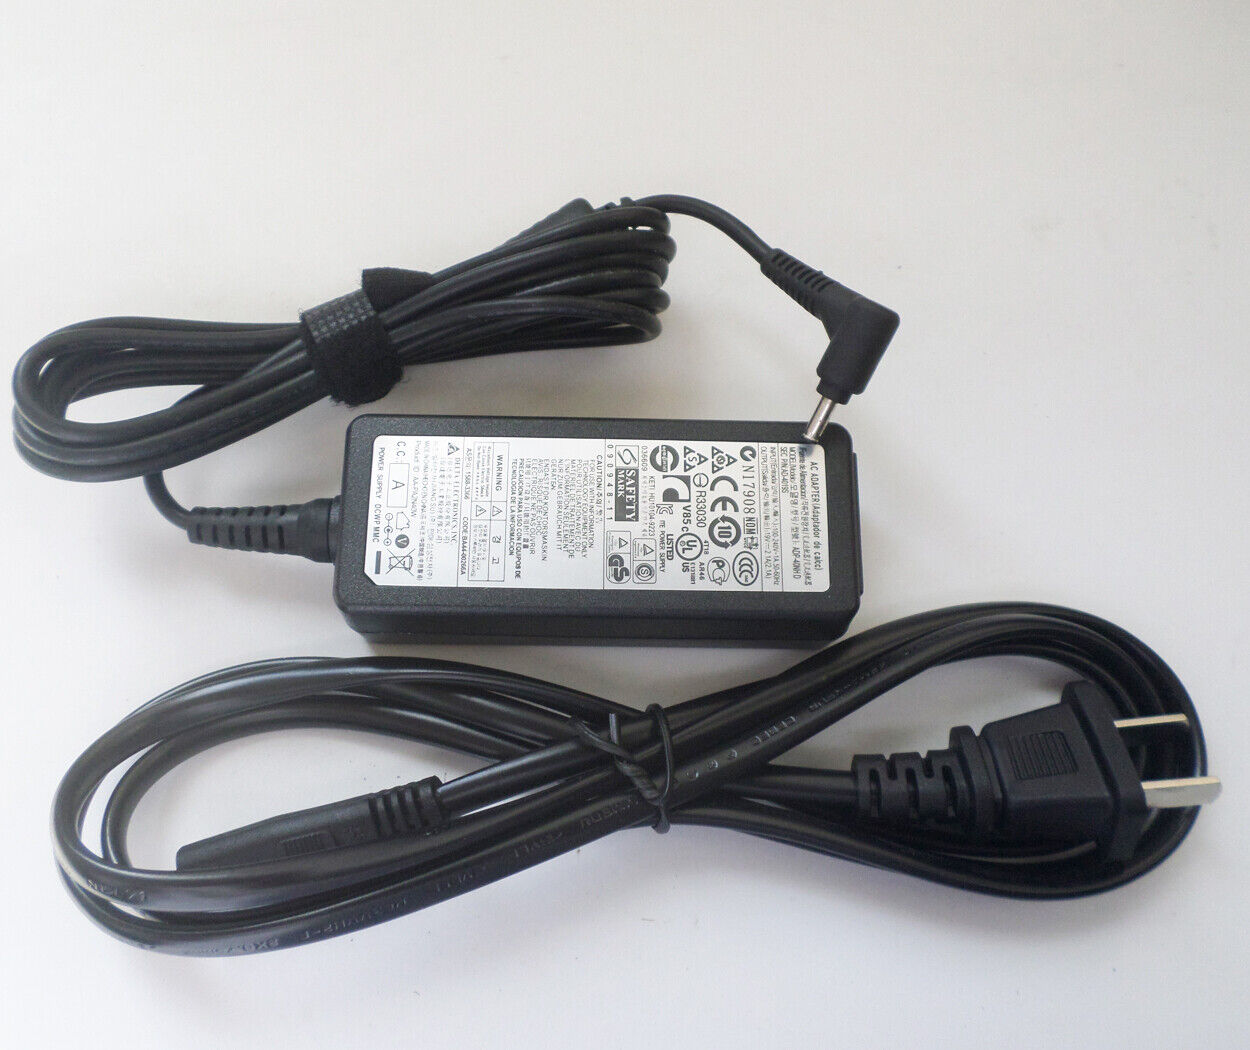 Original AC Charger For Samsung Series 5 19V 2.1A 3.0mm*1.1mm Power Supply Cord